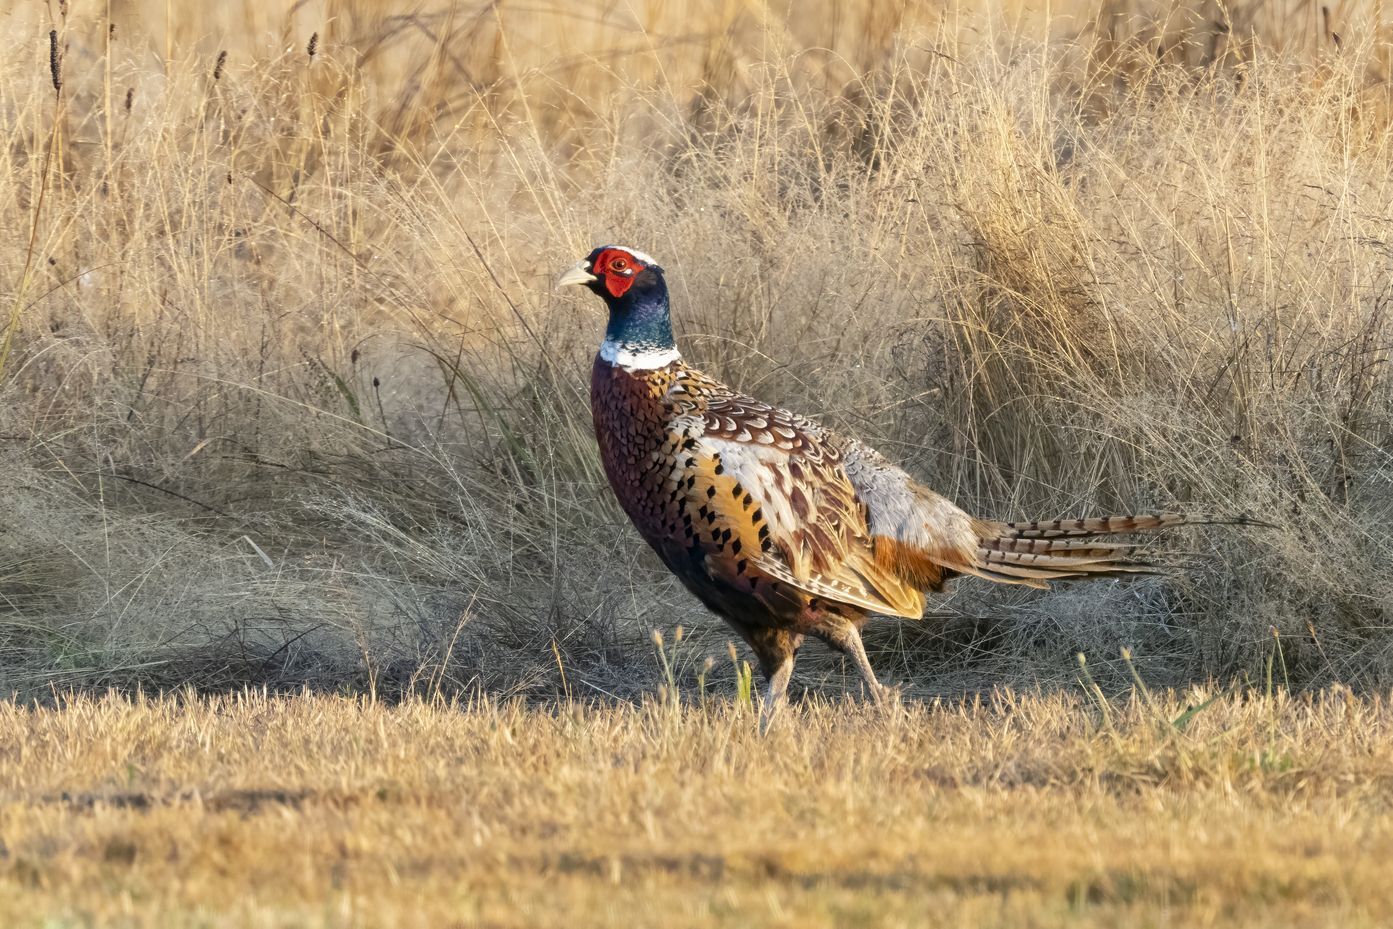 Photo of a ring-necked pheasant by Mick Thompson.